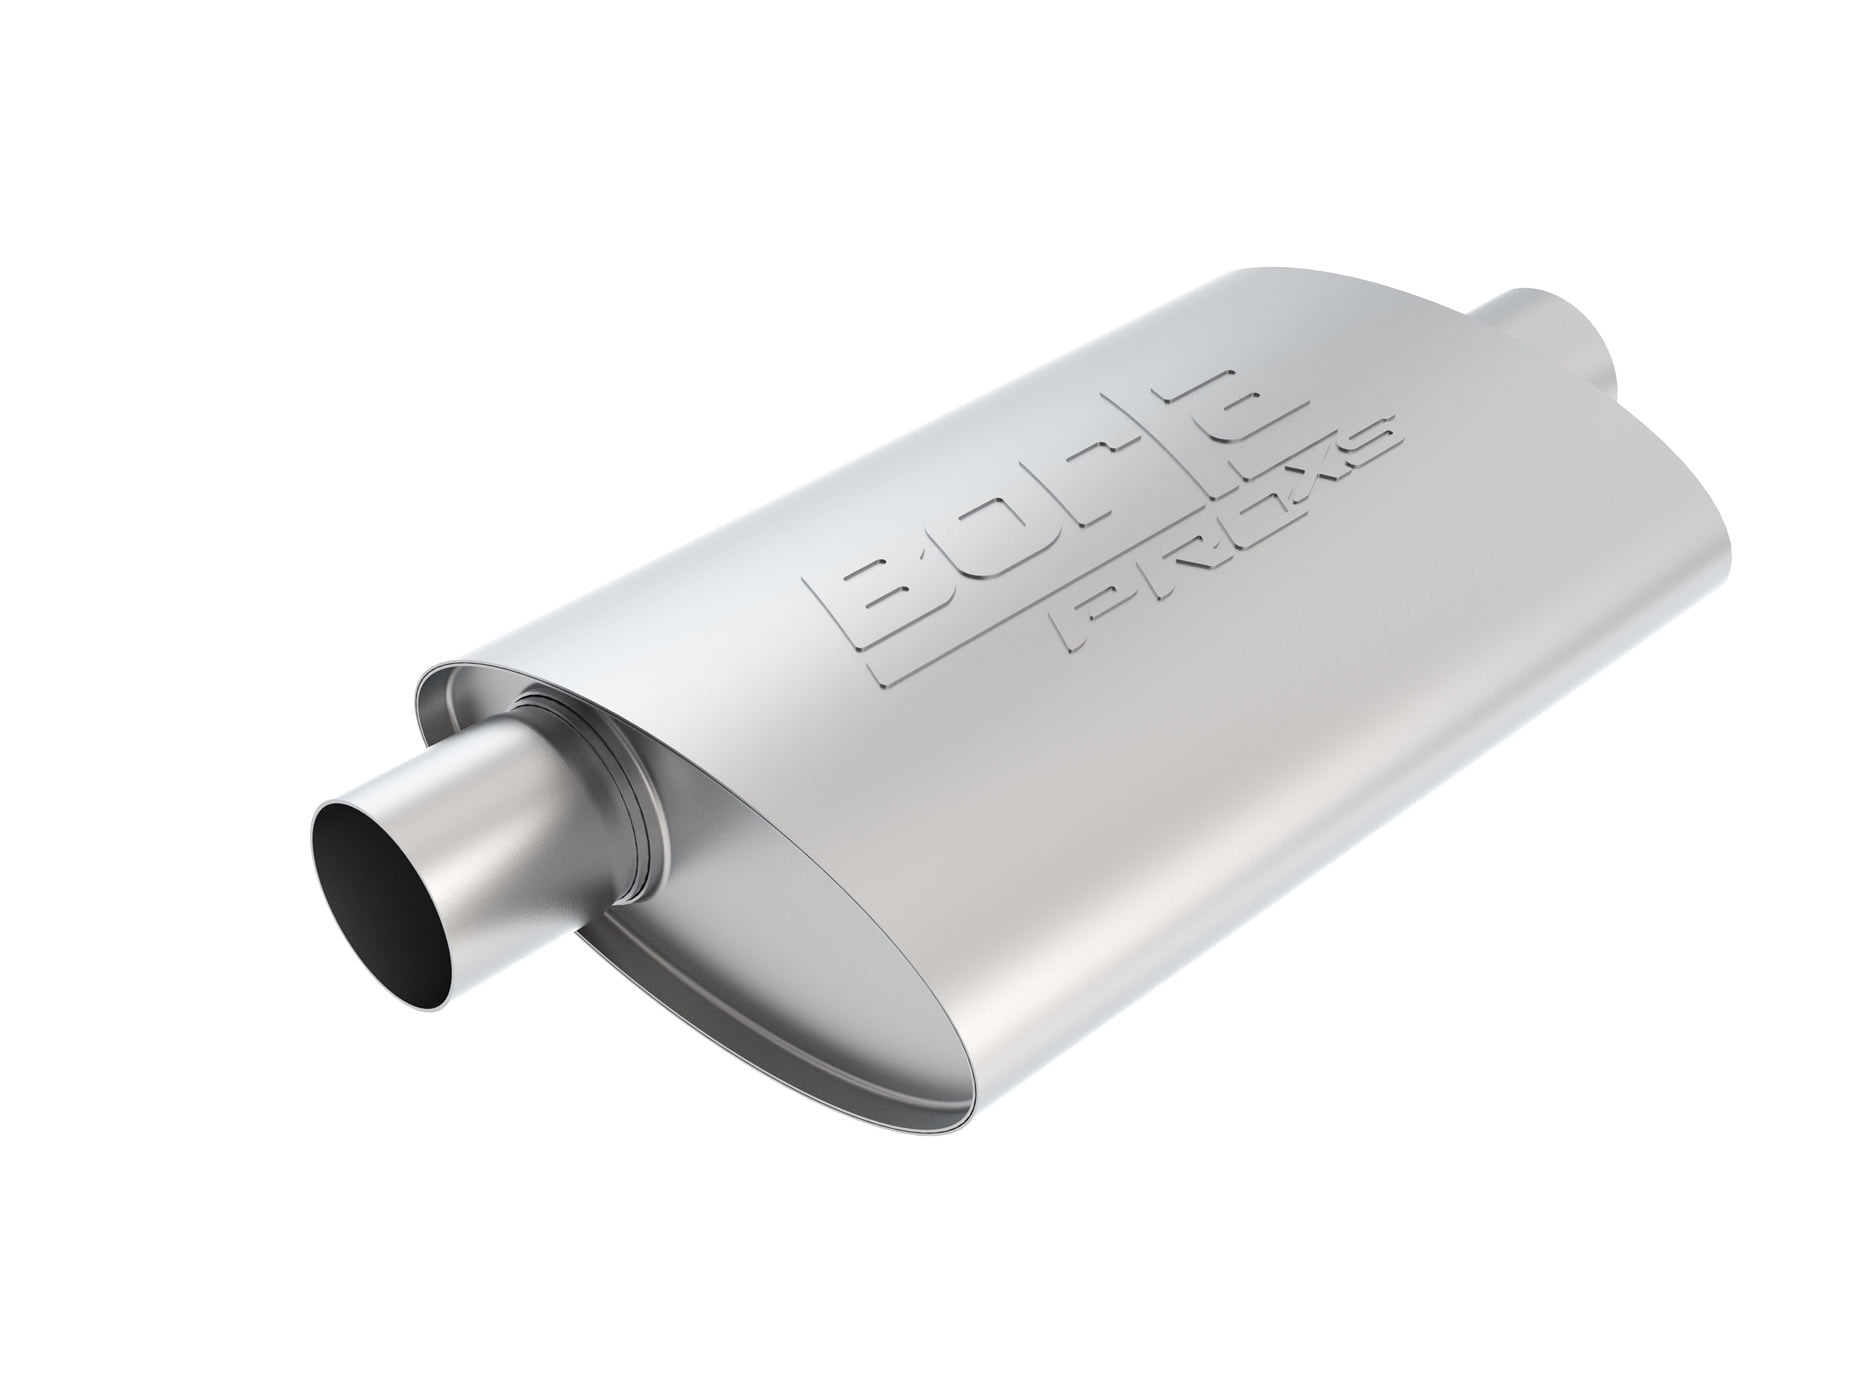 Borla 40085 XR-1 Stainless Sportsman Racing Muffler Round 3" Inlet 3" Outlet 